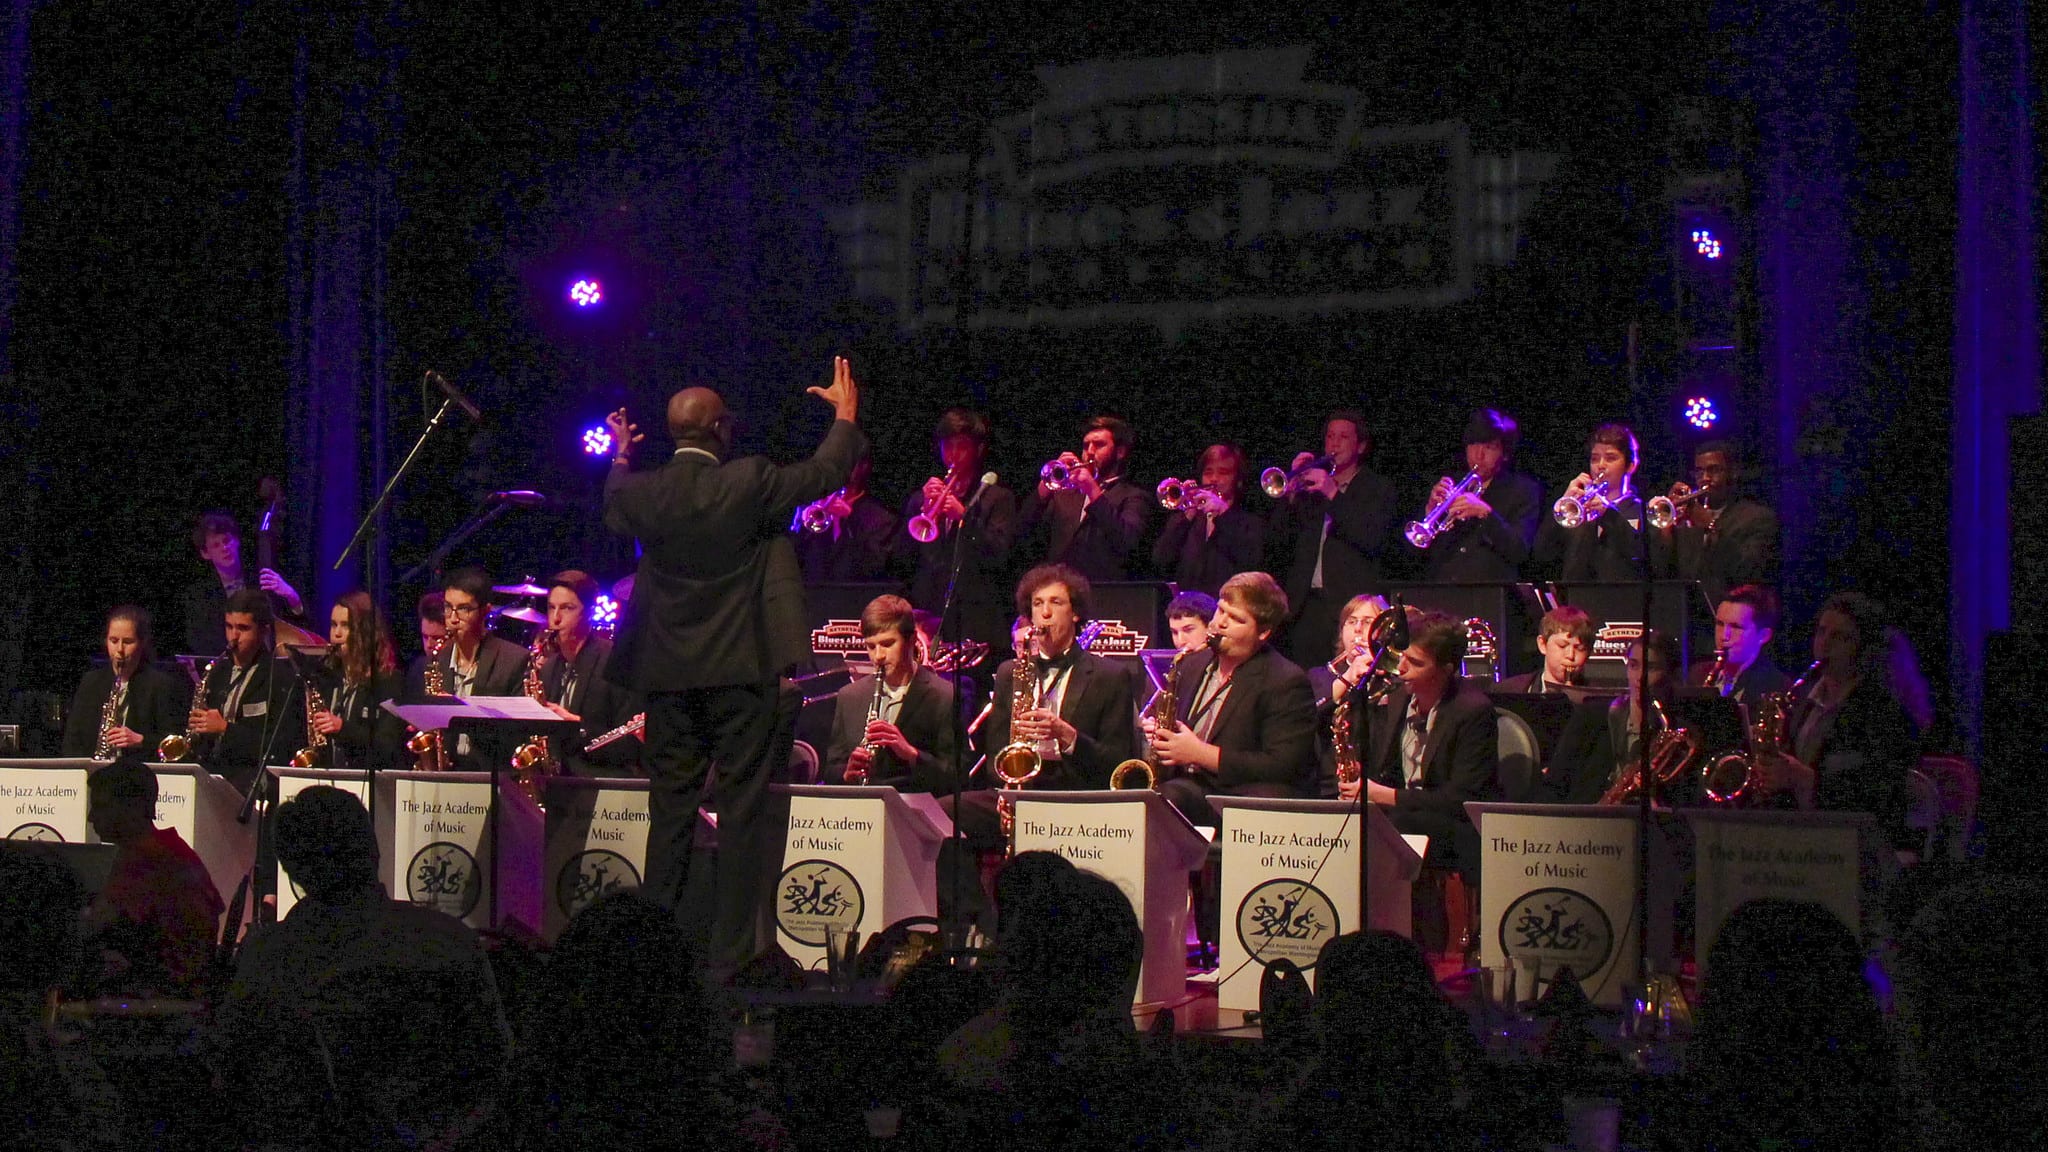 The saxophonist and educator Paul Carr leads his Jazz Academy of Music big band in a 2016 concert at Bethesda Blues & Jazz. Courtesy woodleywonderworks/flickr